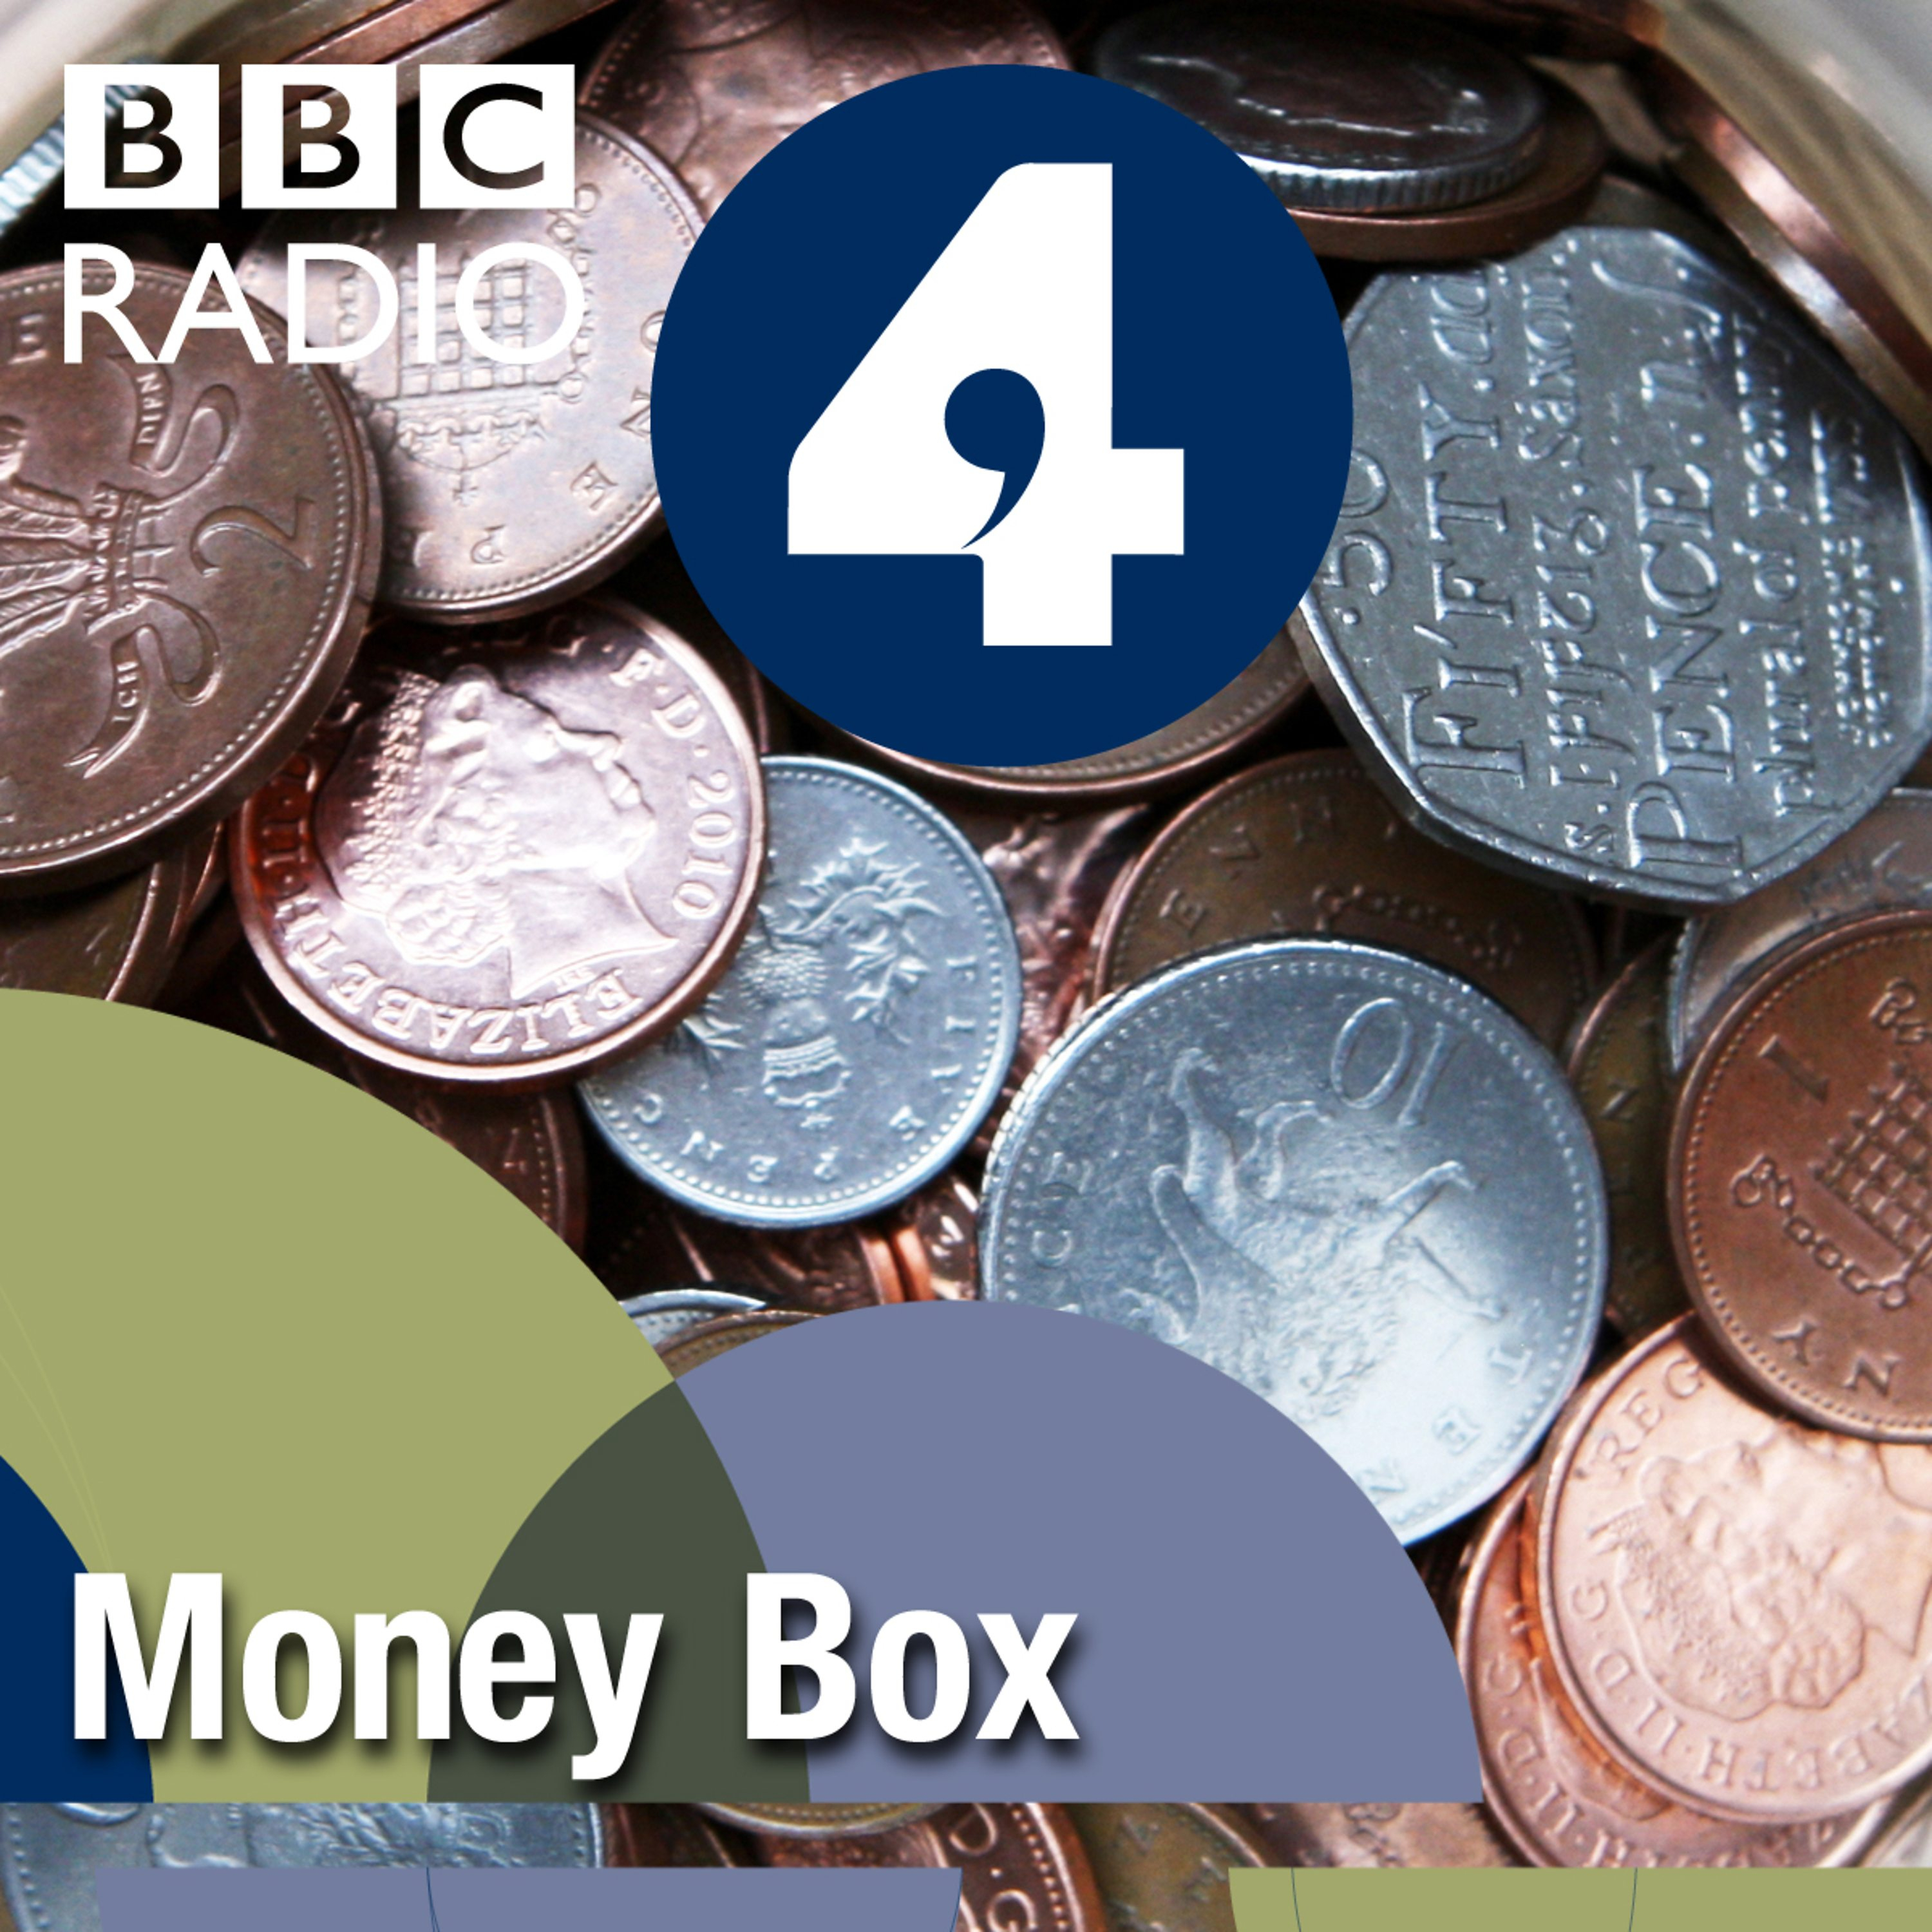 Martin Lewis Budget Spreadsheet with Money Box Live: The Autumn Budget 2017 Money Box Podcast